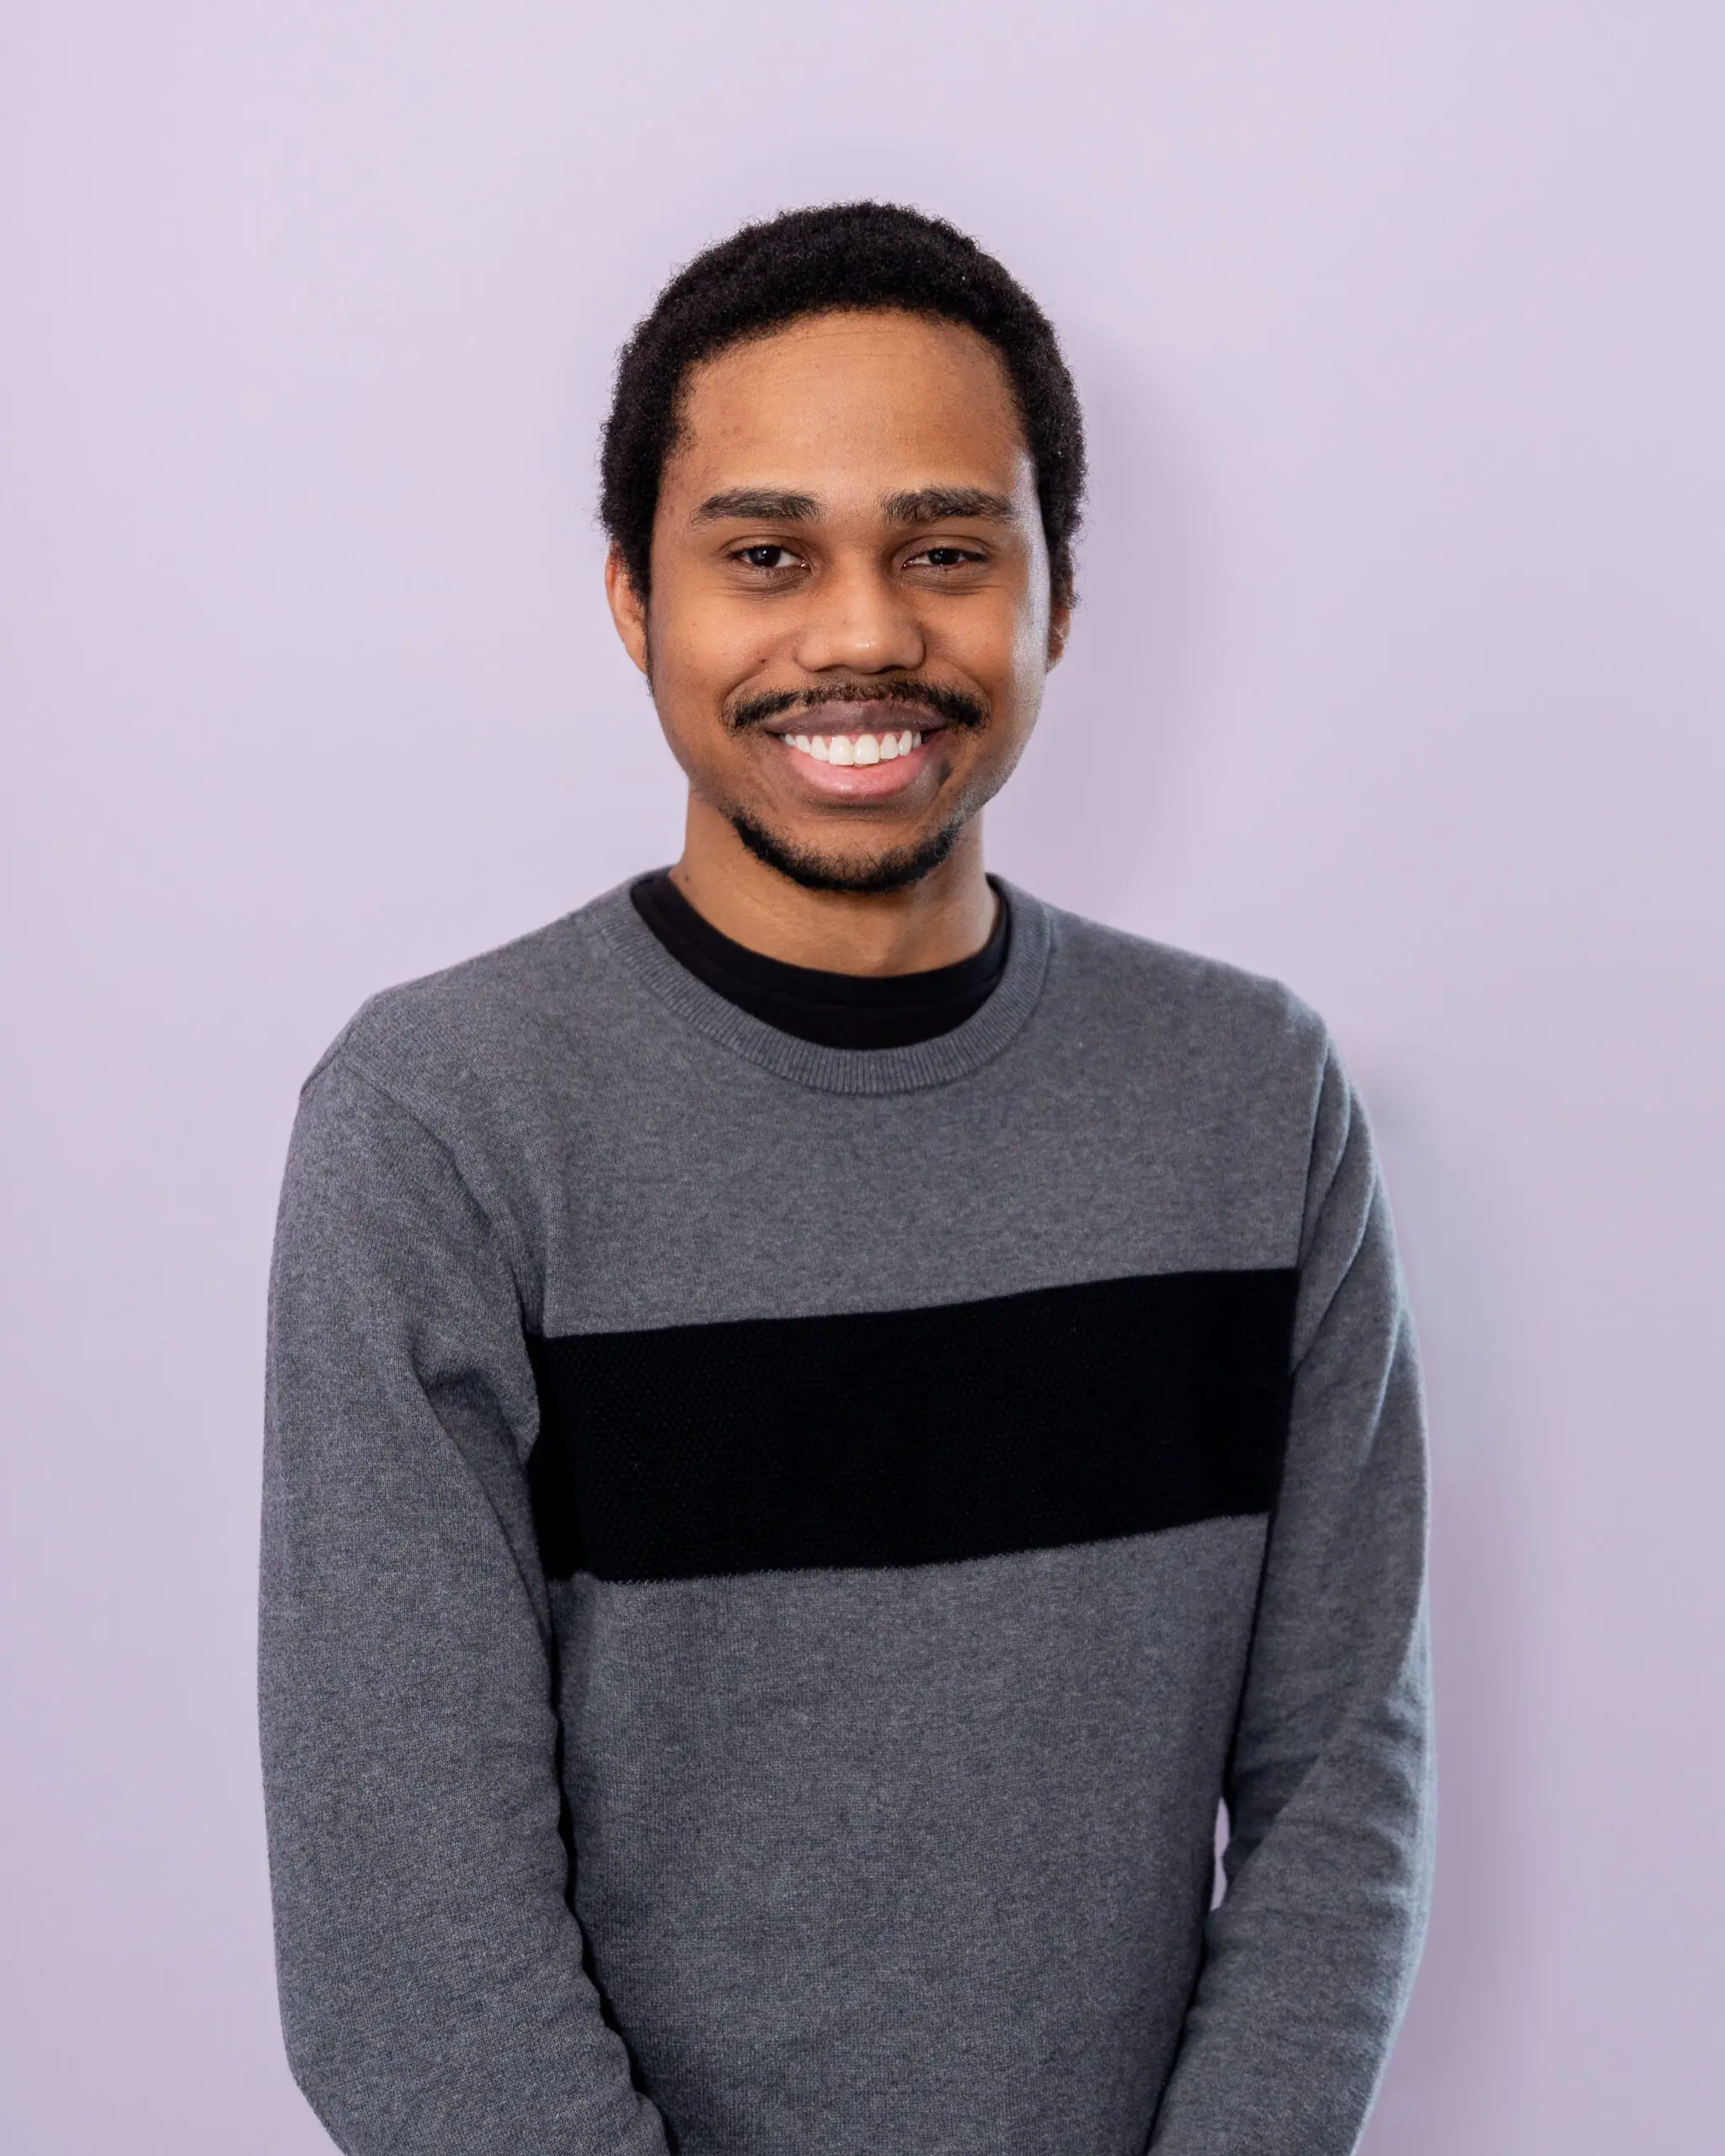 Black male, smiling and wearing a grey sweater with a black stripe. Thomas is standing against a purple wall.